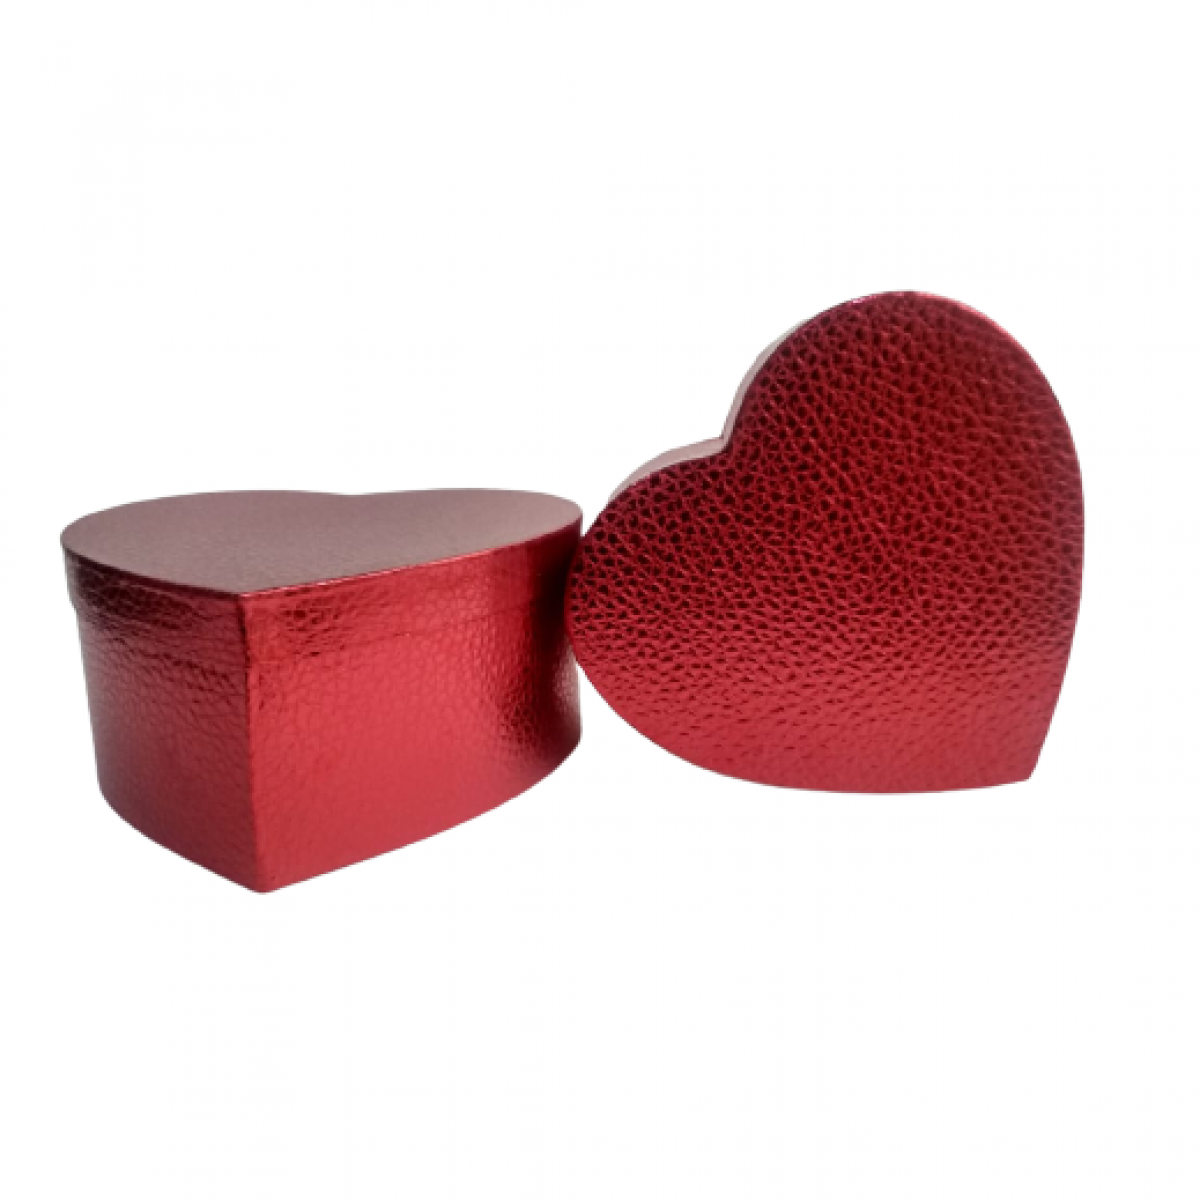 5001 Ruby Heart Red Texture Paper Gift Box Lined - Set of 2